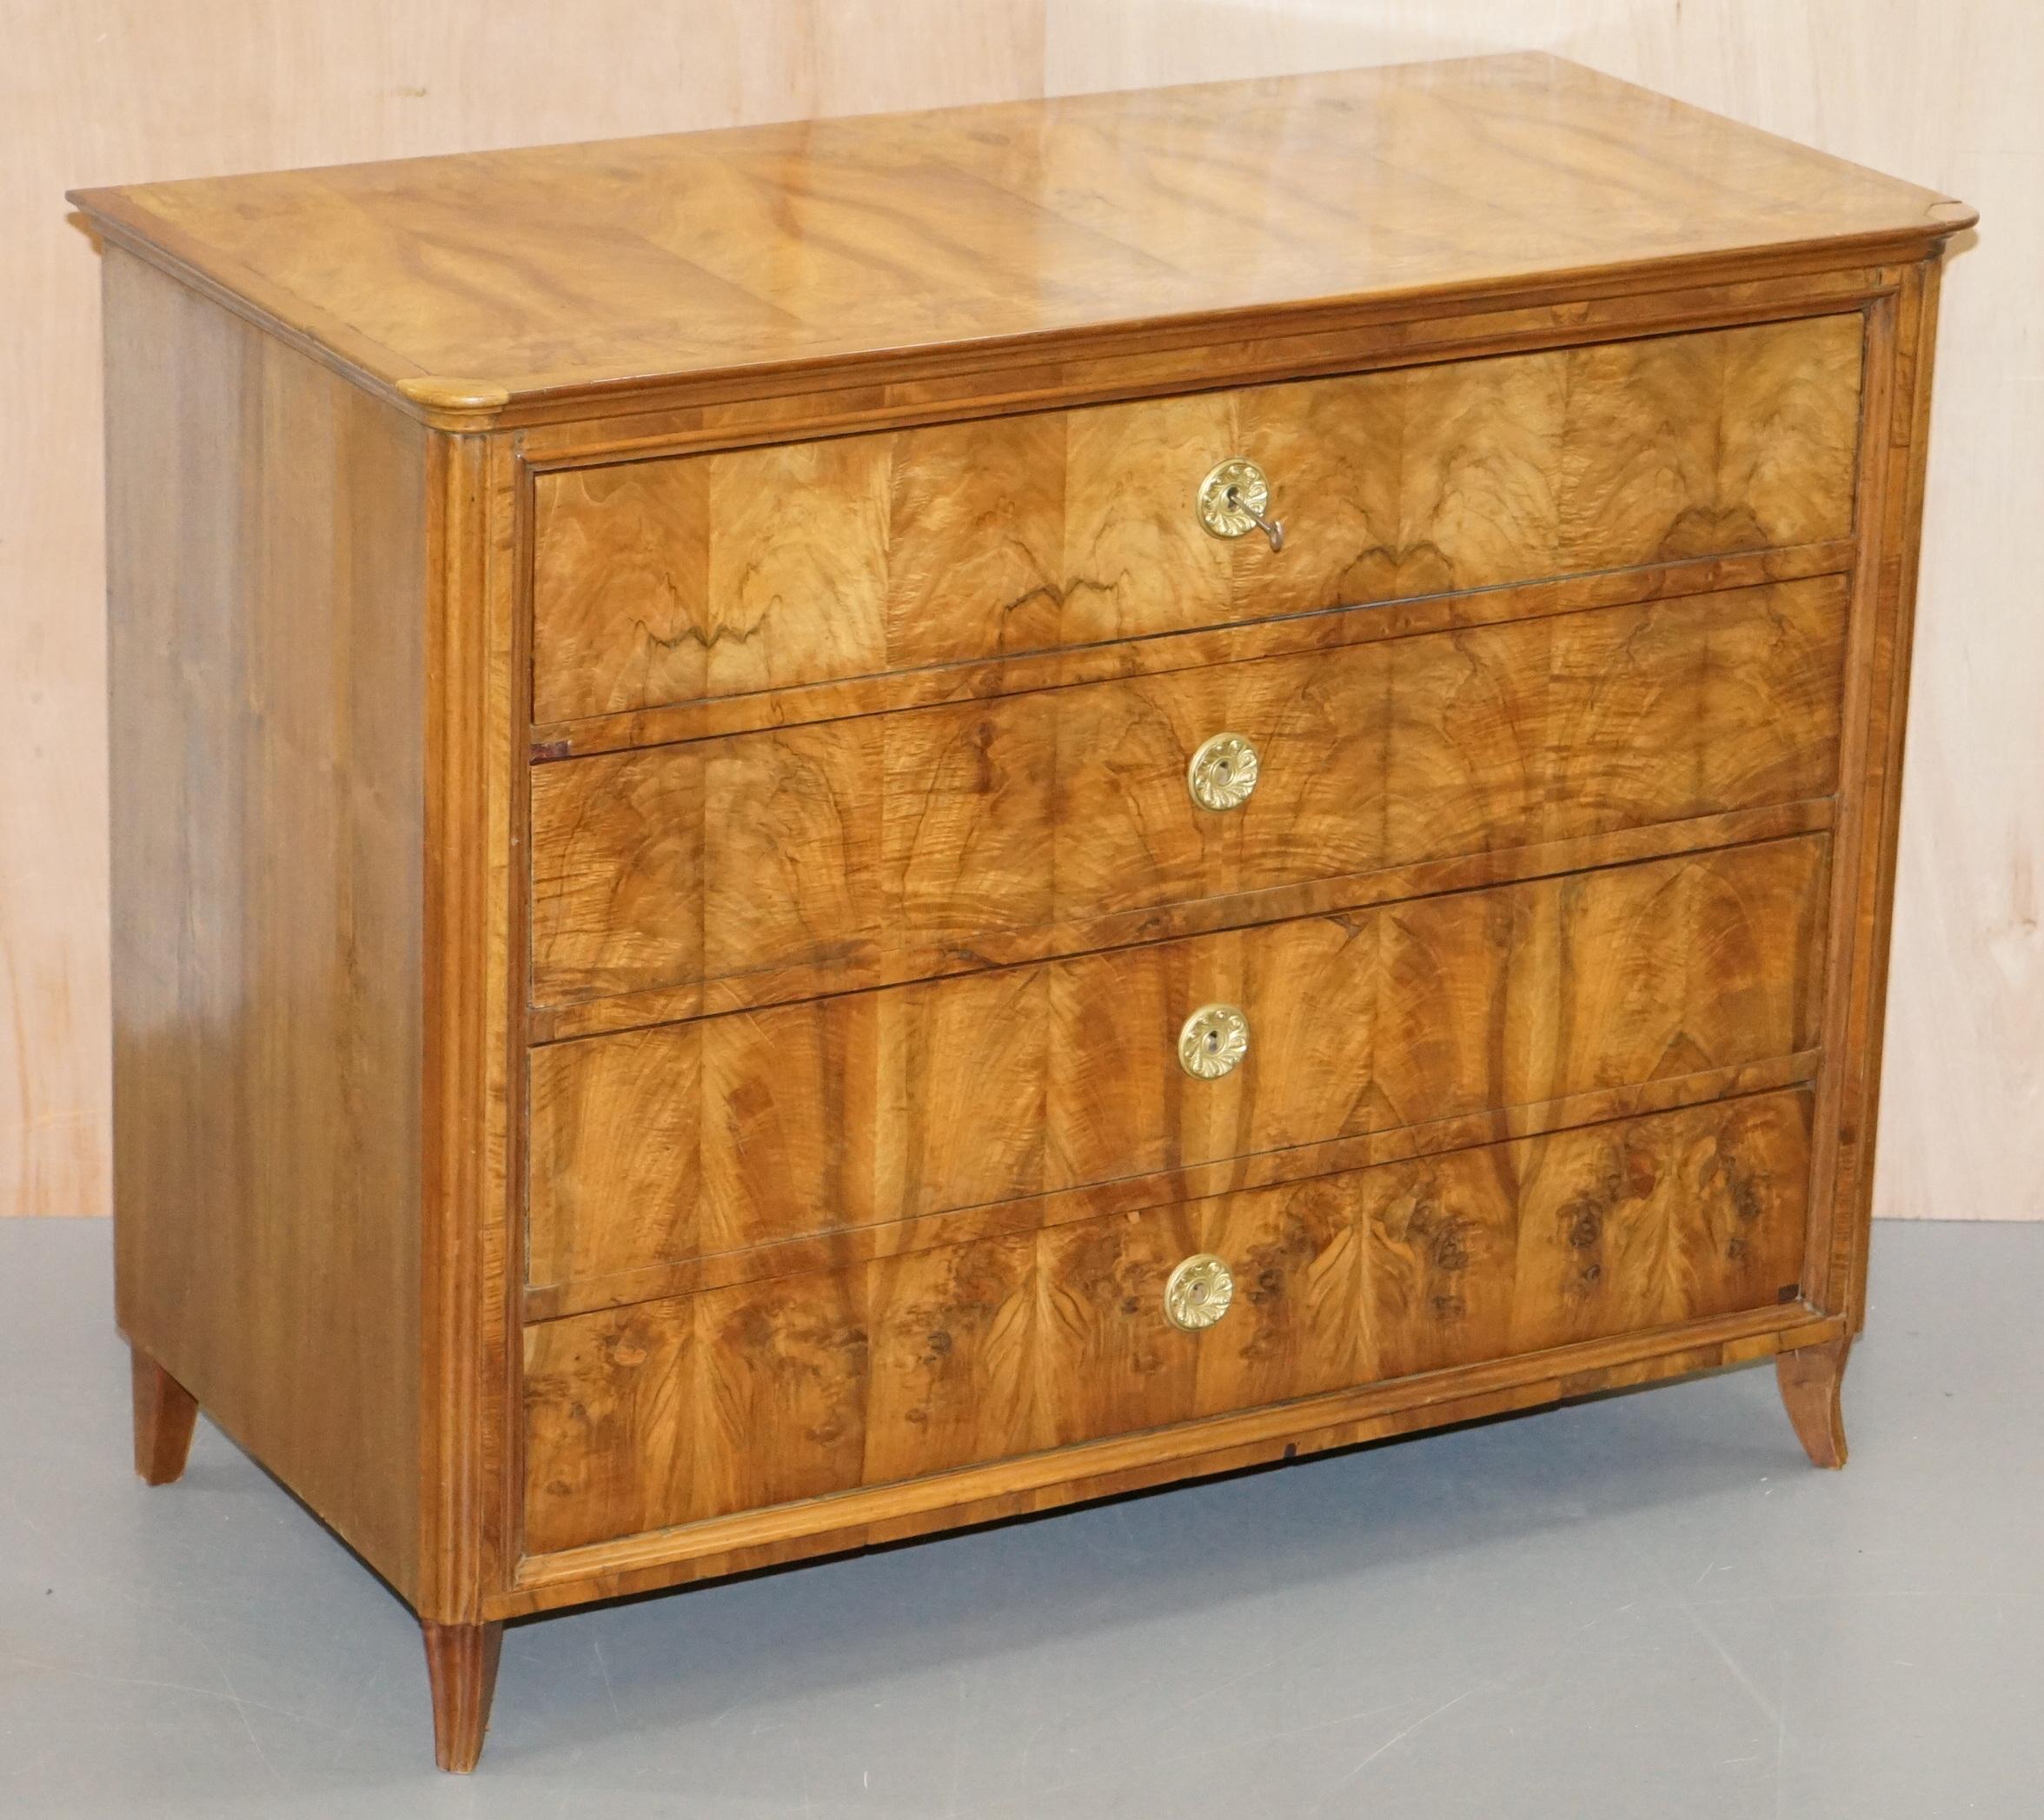 We are delighted to offer for sale this stunning large 19th century Swedish Biedermeier walnut chest of drawers with sliding drop front Secretaire desk

A very good looking and functional piece of collectable furniture. These drawers are around